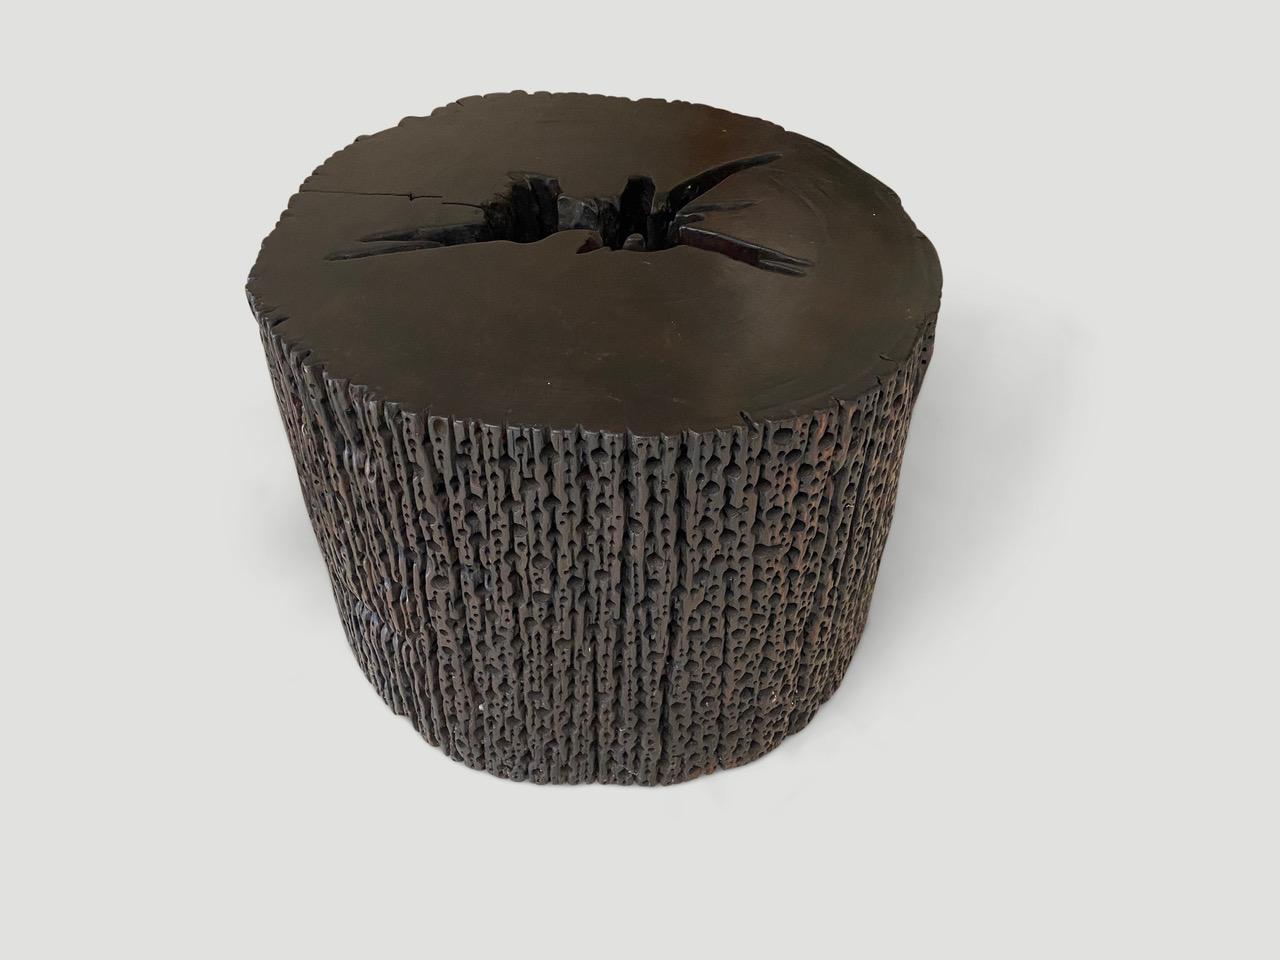 This century old iron wood log is transformed into a stunningly beautiful coffee table or side table. After years submerged beneath the sea, tiny holes have formed through a wholly natural and organic process. Captured and restored, it is a rare and